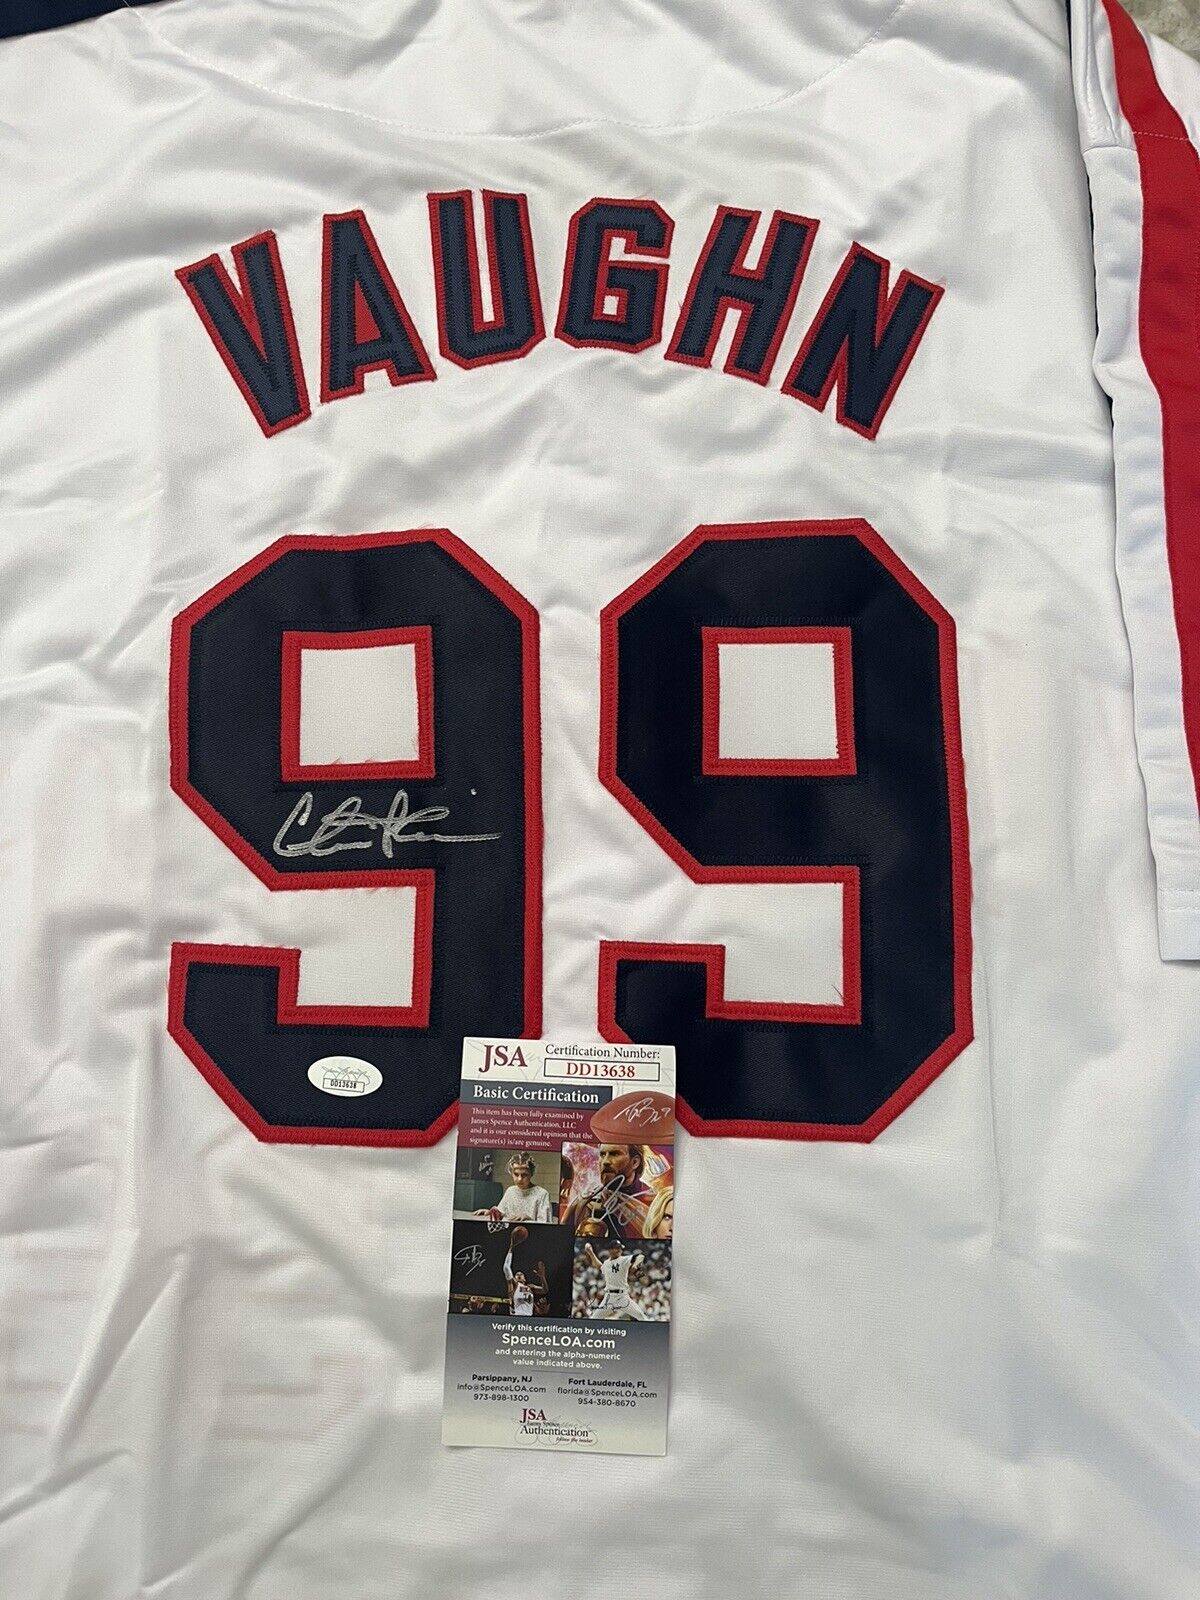 Charlie Sheen Autographed Signed Jersey Wild thing Auto Ricky Vaughn JSA COA